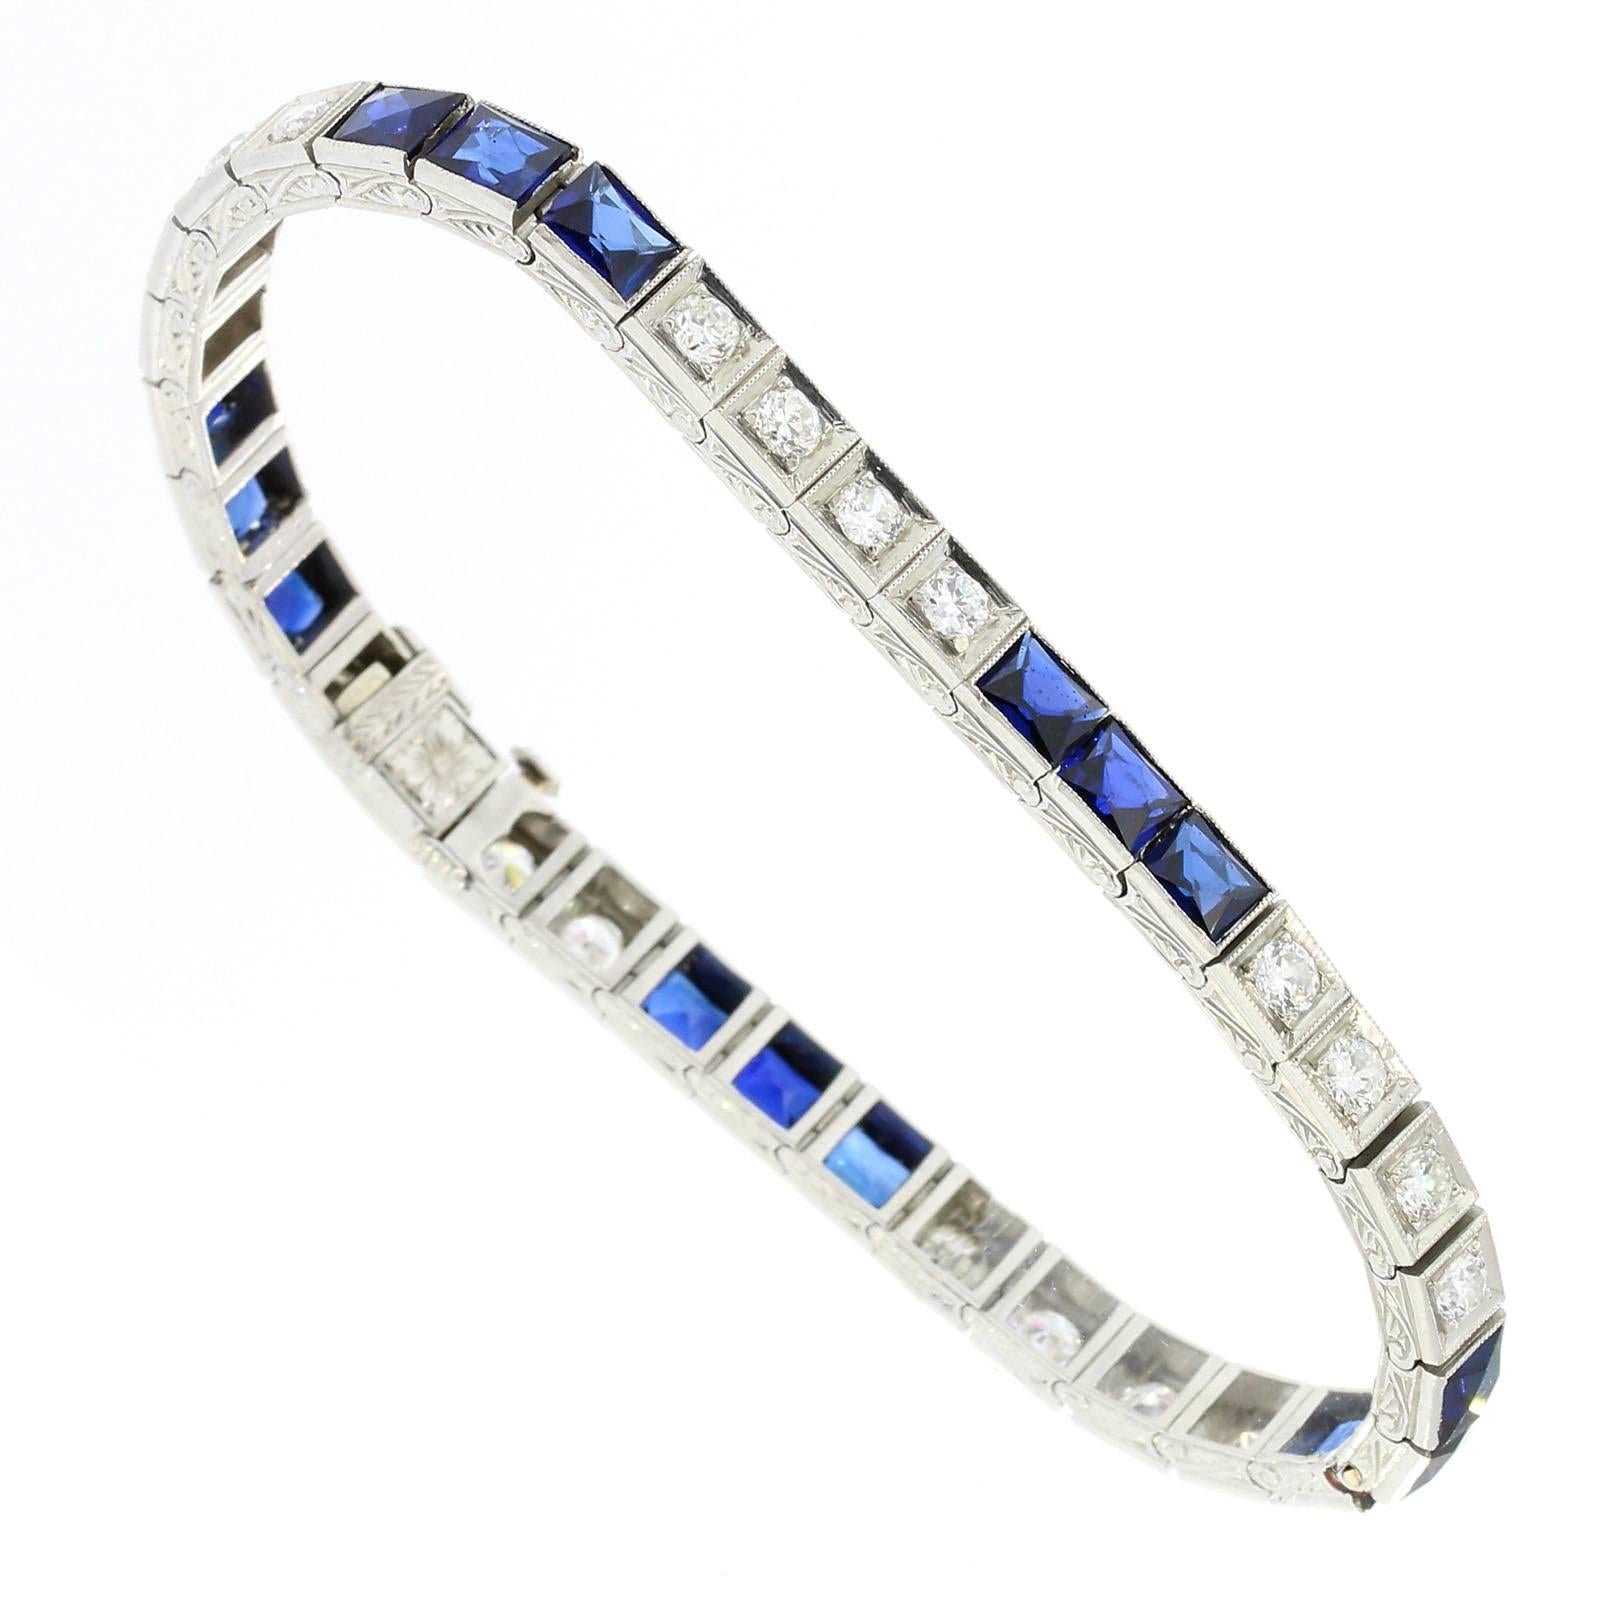 An original and pristine box link design straight line.  The bracelet is fabricated in platinum and set with two carat of Old European Cut Diamonds alternating with five sections of French Cut original Synthetic Sapphires.  Elaborate hand engraving